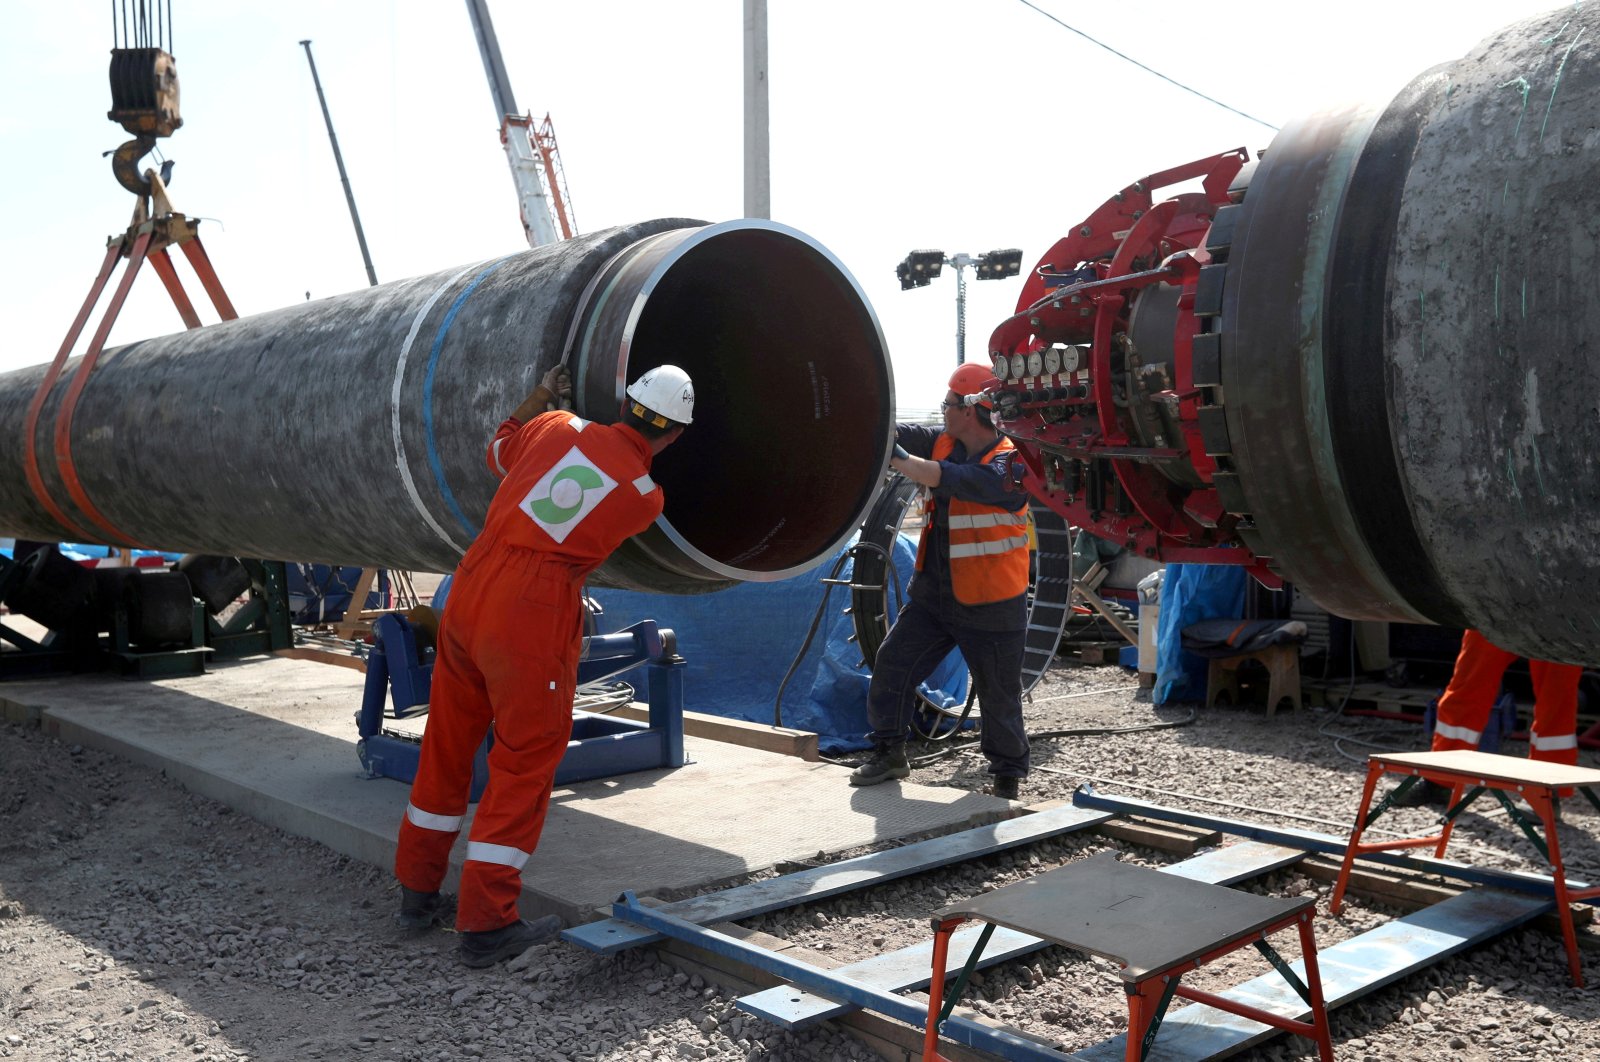 Workers are seen at the construction site of the Nord Stream 2 gas pipeline, near the town of Kingisepp, Leningrad region, Russia, June 5, 2019. (Reuters File Photo)